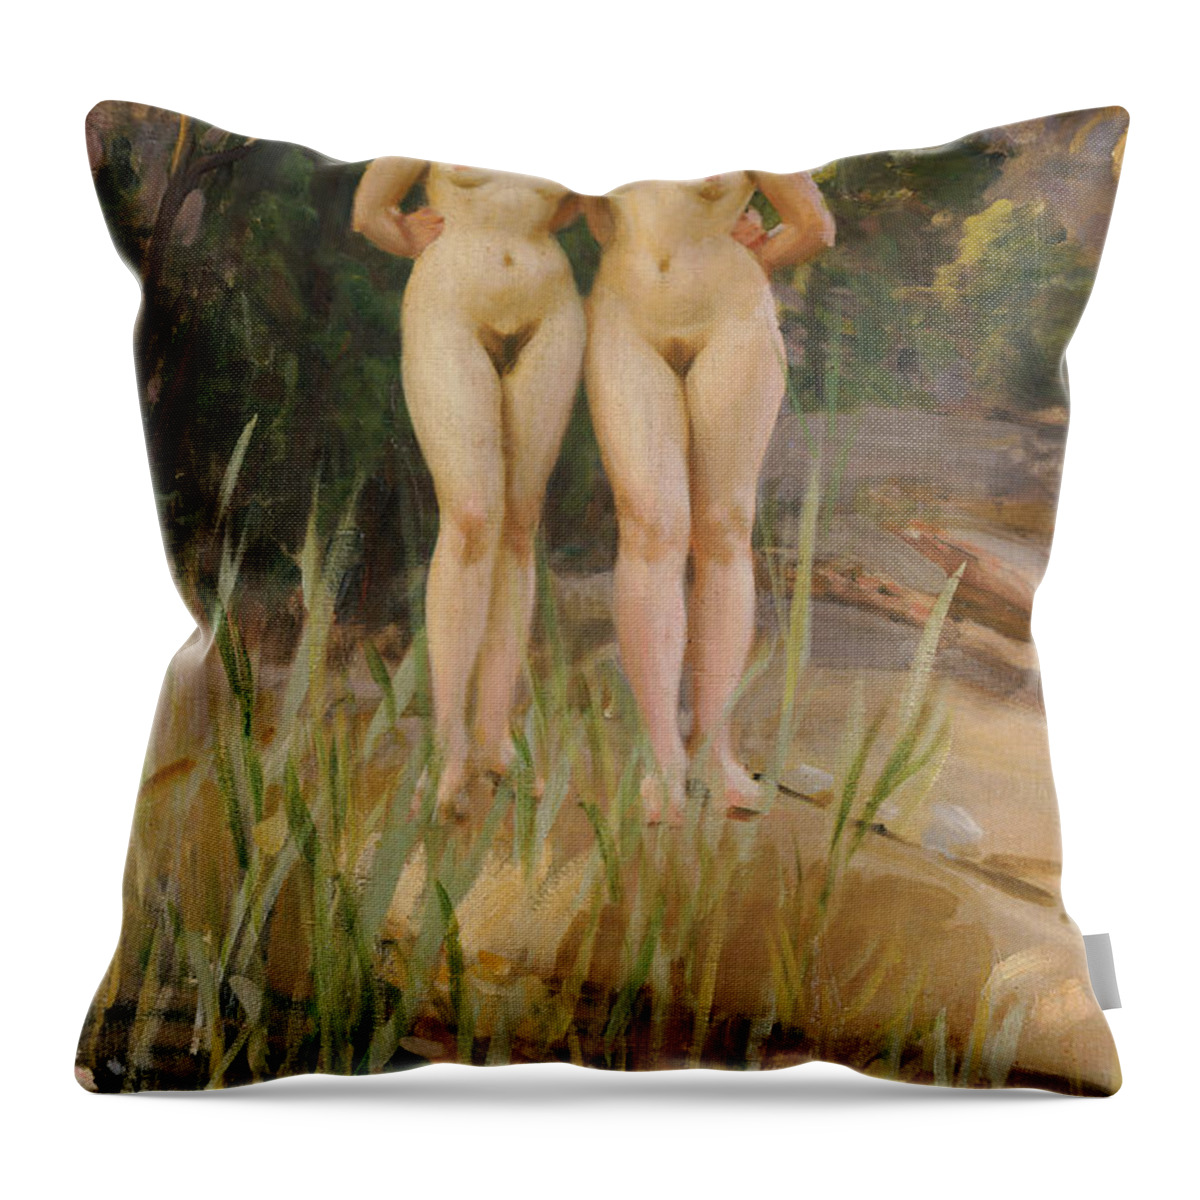 Nude Throw Pillow featuring the painting Two Friends by Anders Leonard Zorn